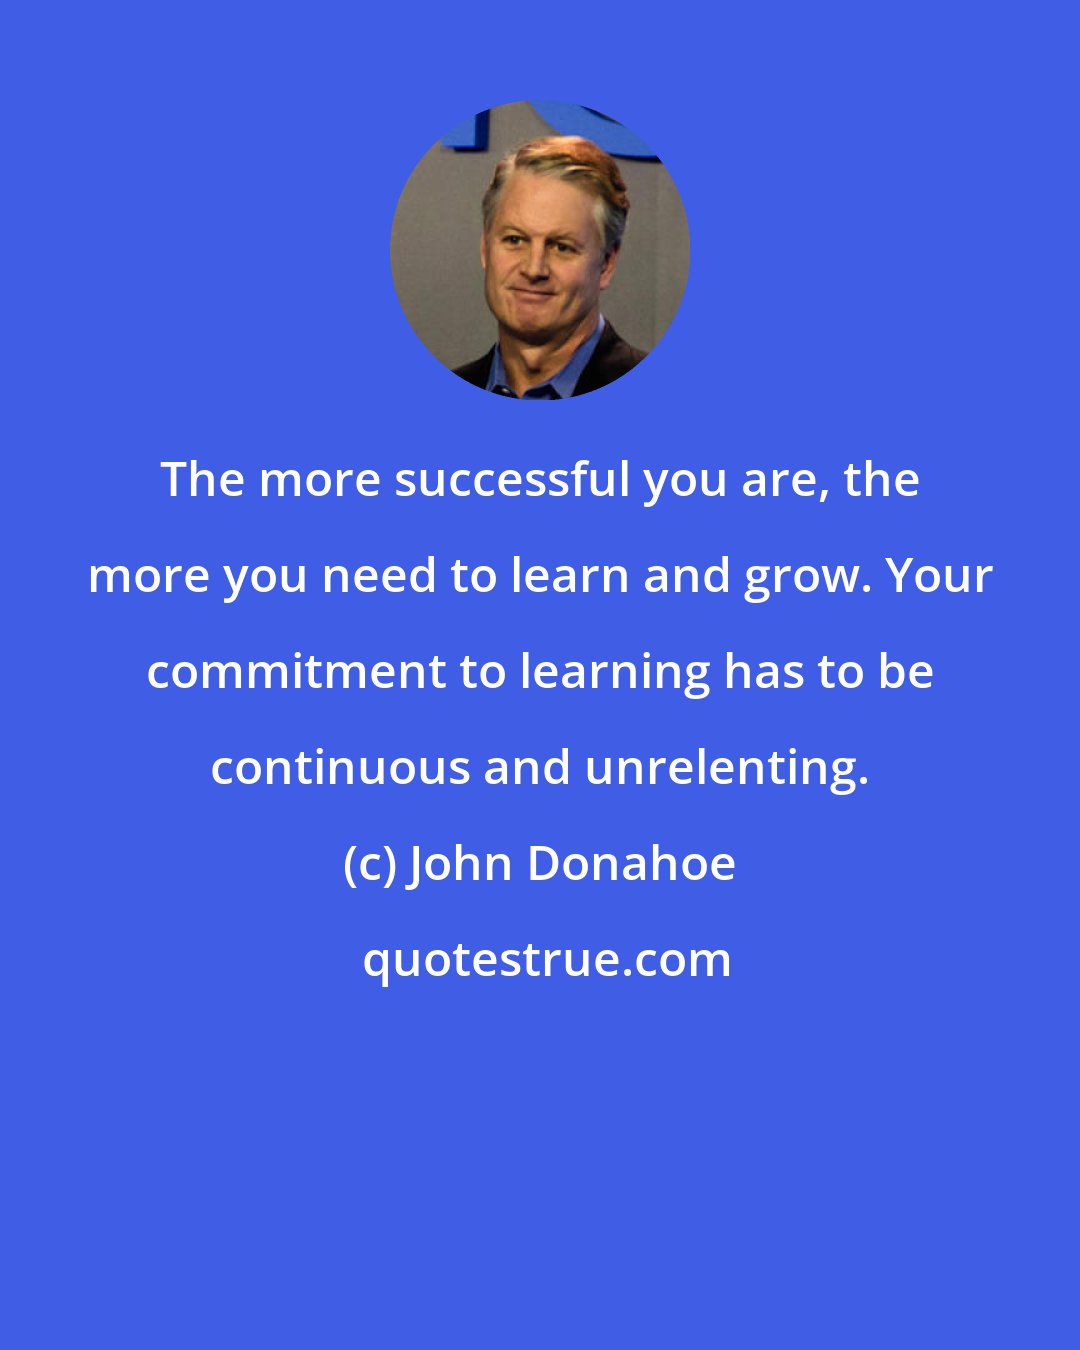 John Donahoe: The more successful you are, the more you need to learn and grow. Your commitment to learning has to be continuous and unrelenting.